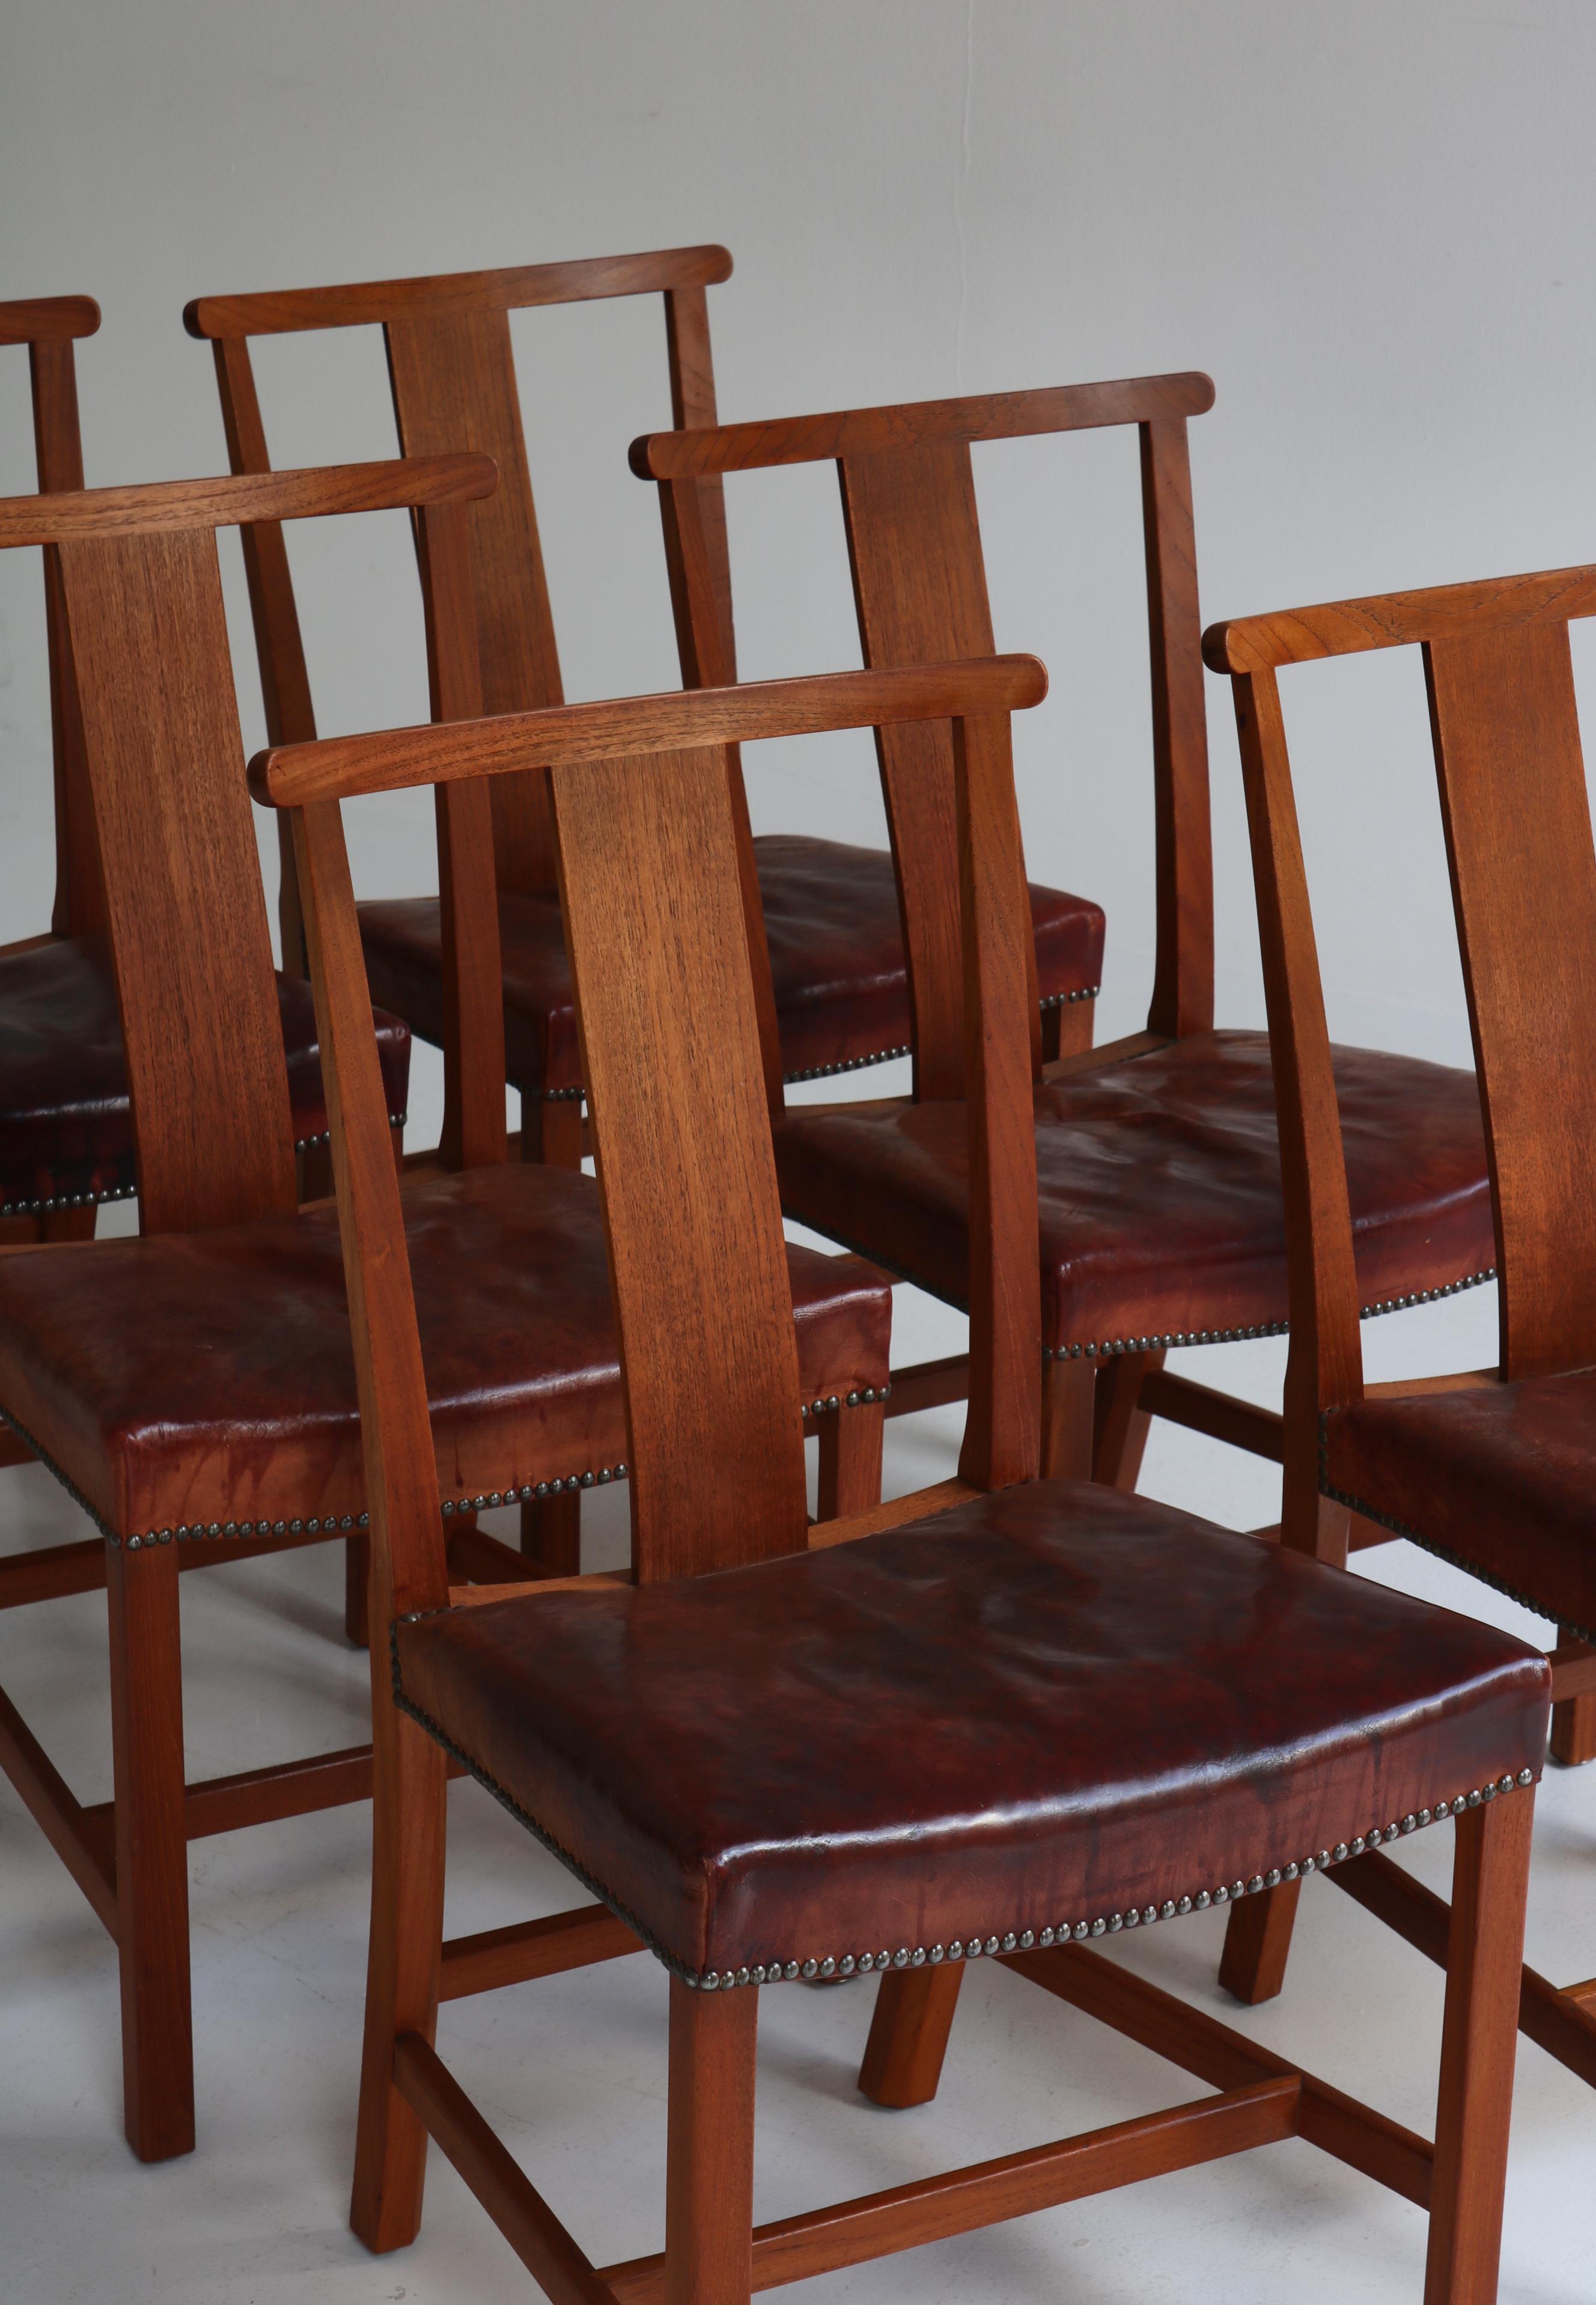 Set of Six Børge Mogensen Dining Chairs in Teak & Niger Leather, 1939, Denmark In Fair Condition For Sale In Odense, DK